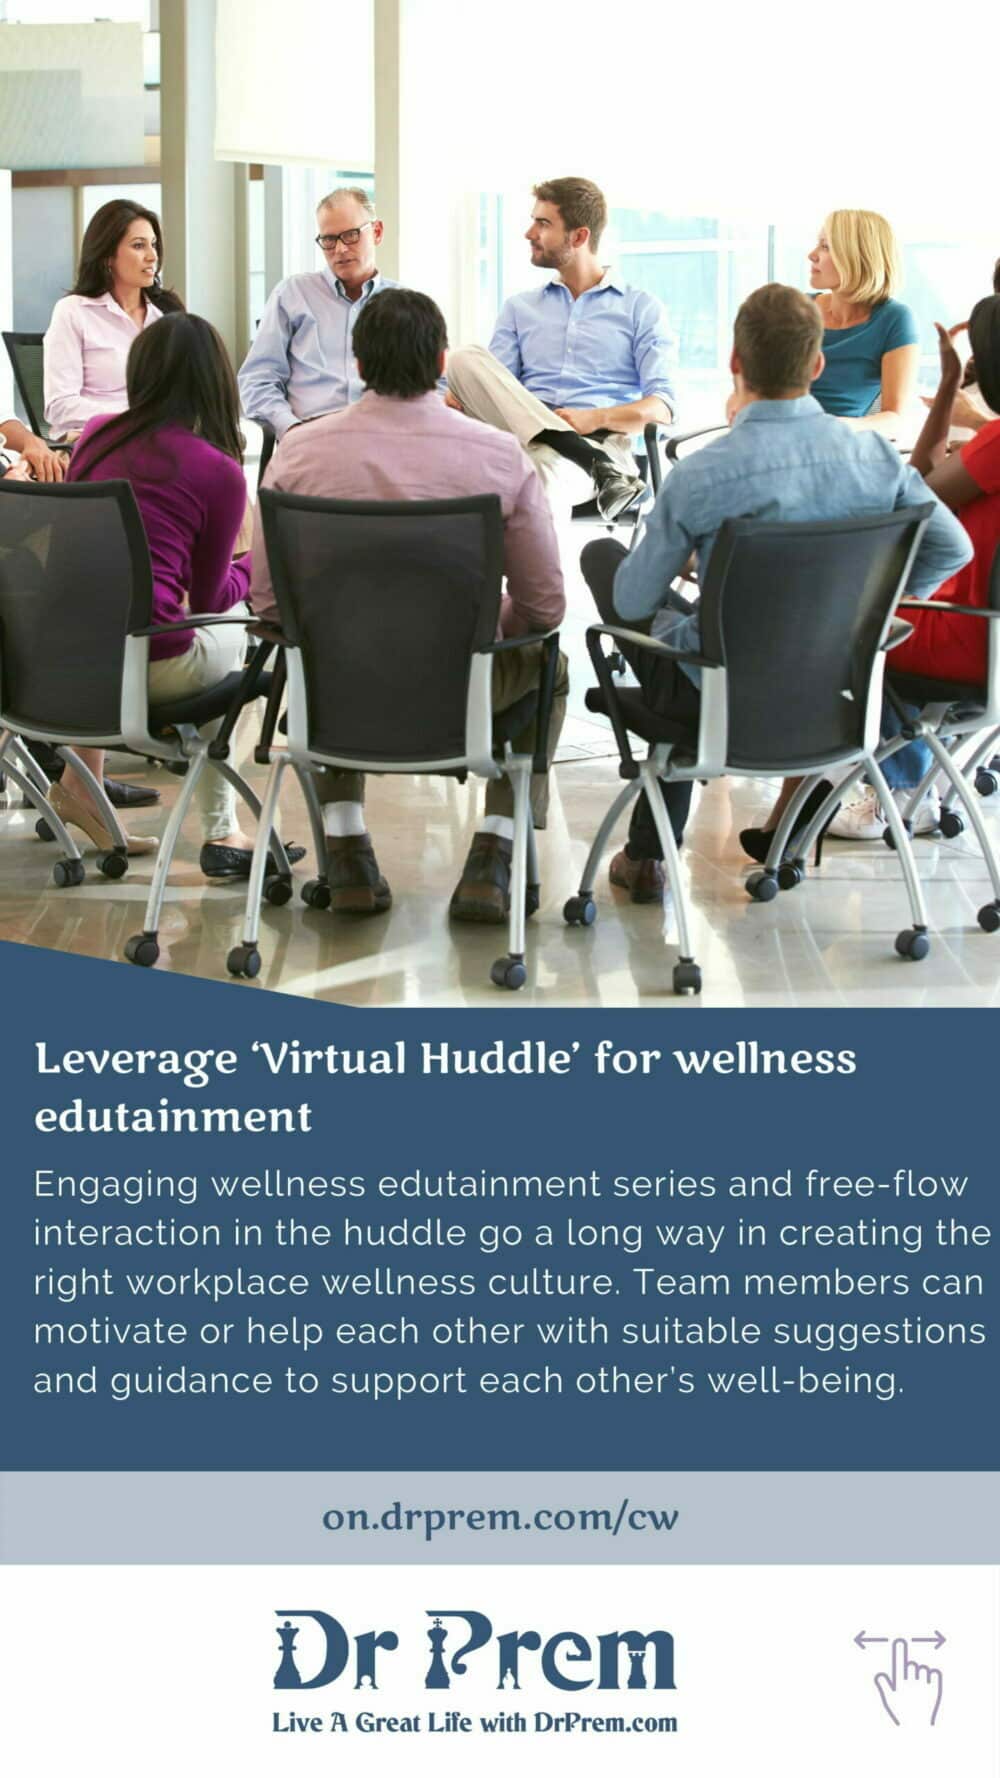 Best Corporate Culture And Wellness Practices To Drive Engagement, Productivity And Well-Being-06